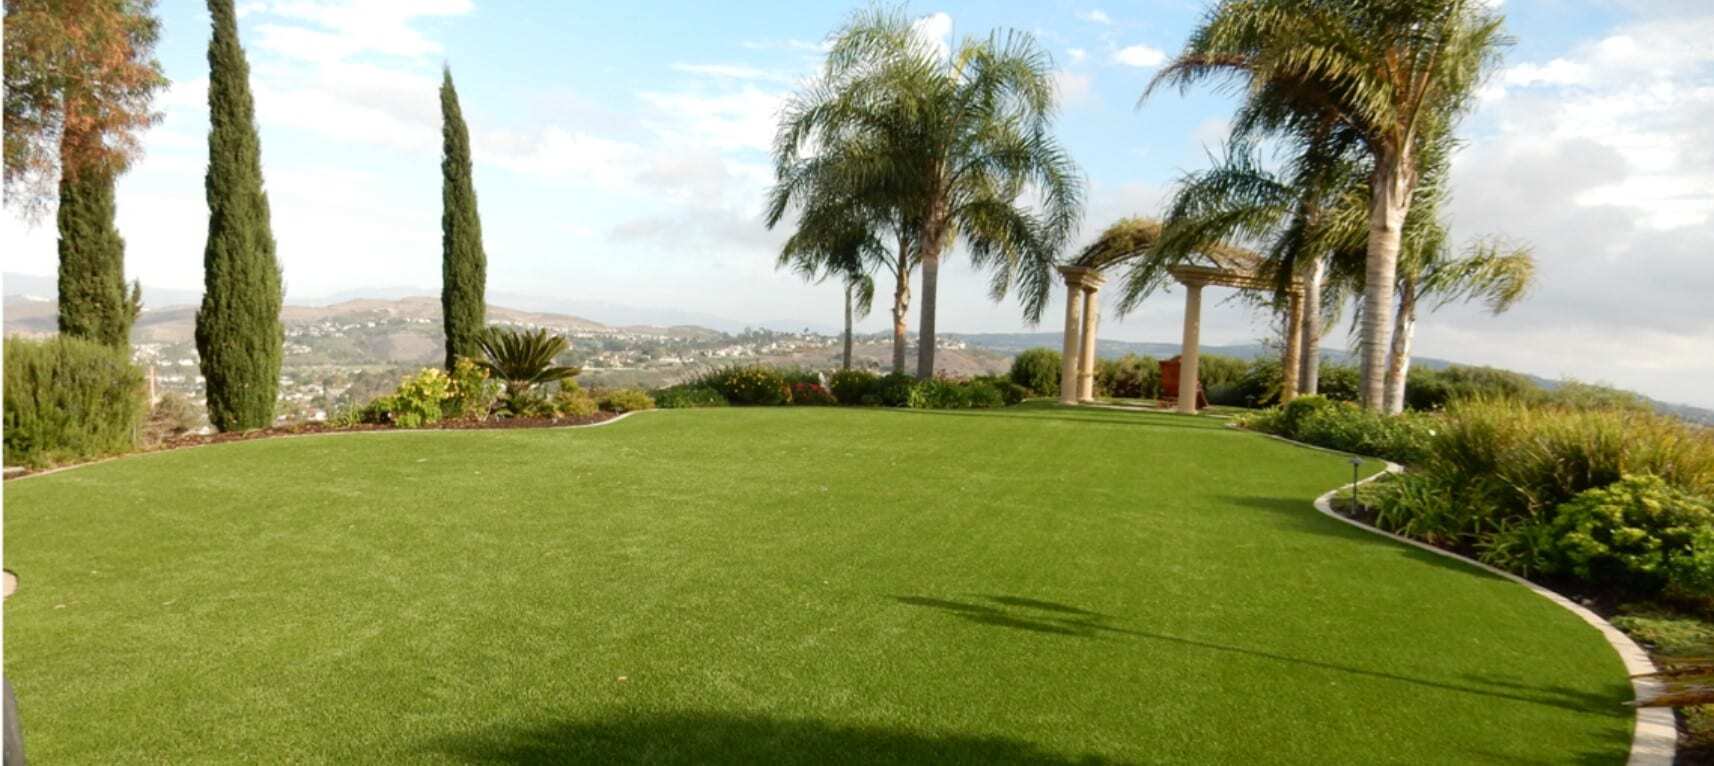 Residential Artificial Grass Landscape & Synthetic Lawns, Los Angeles CA